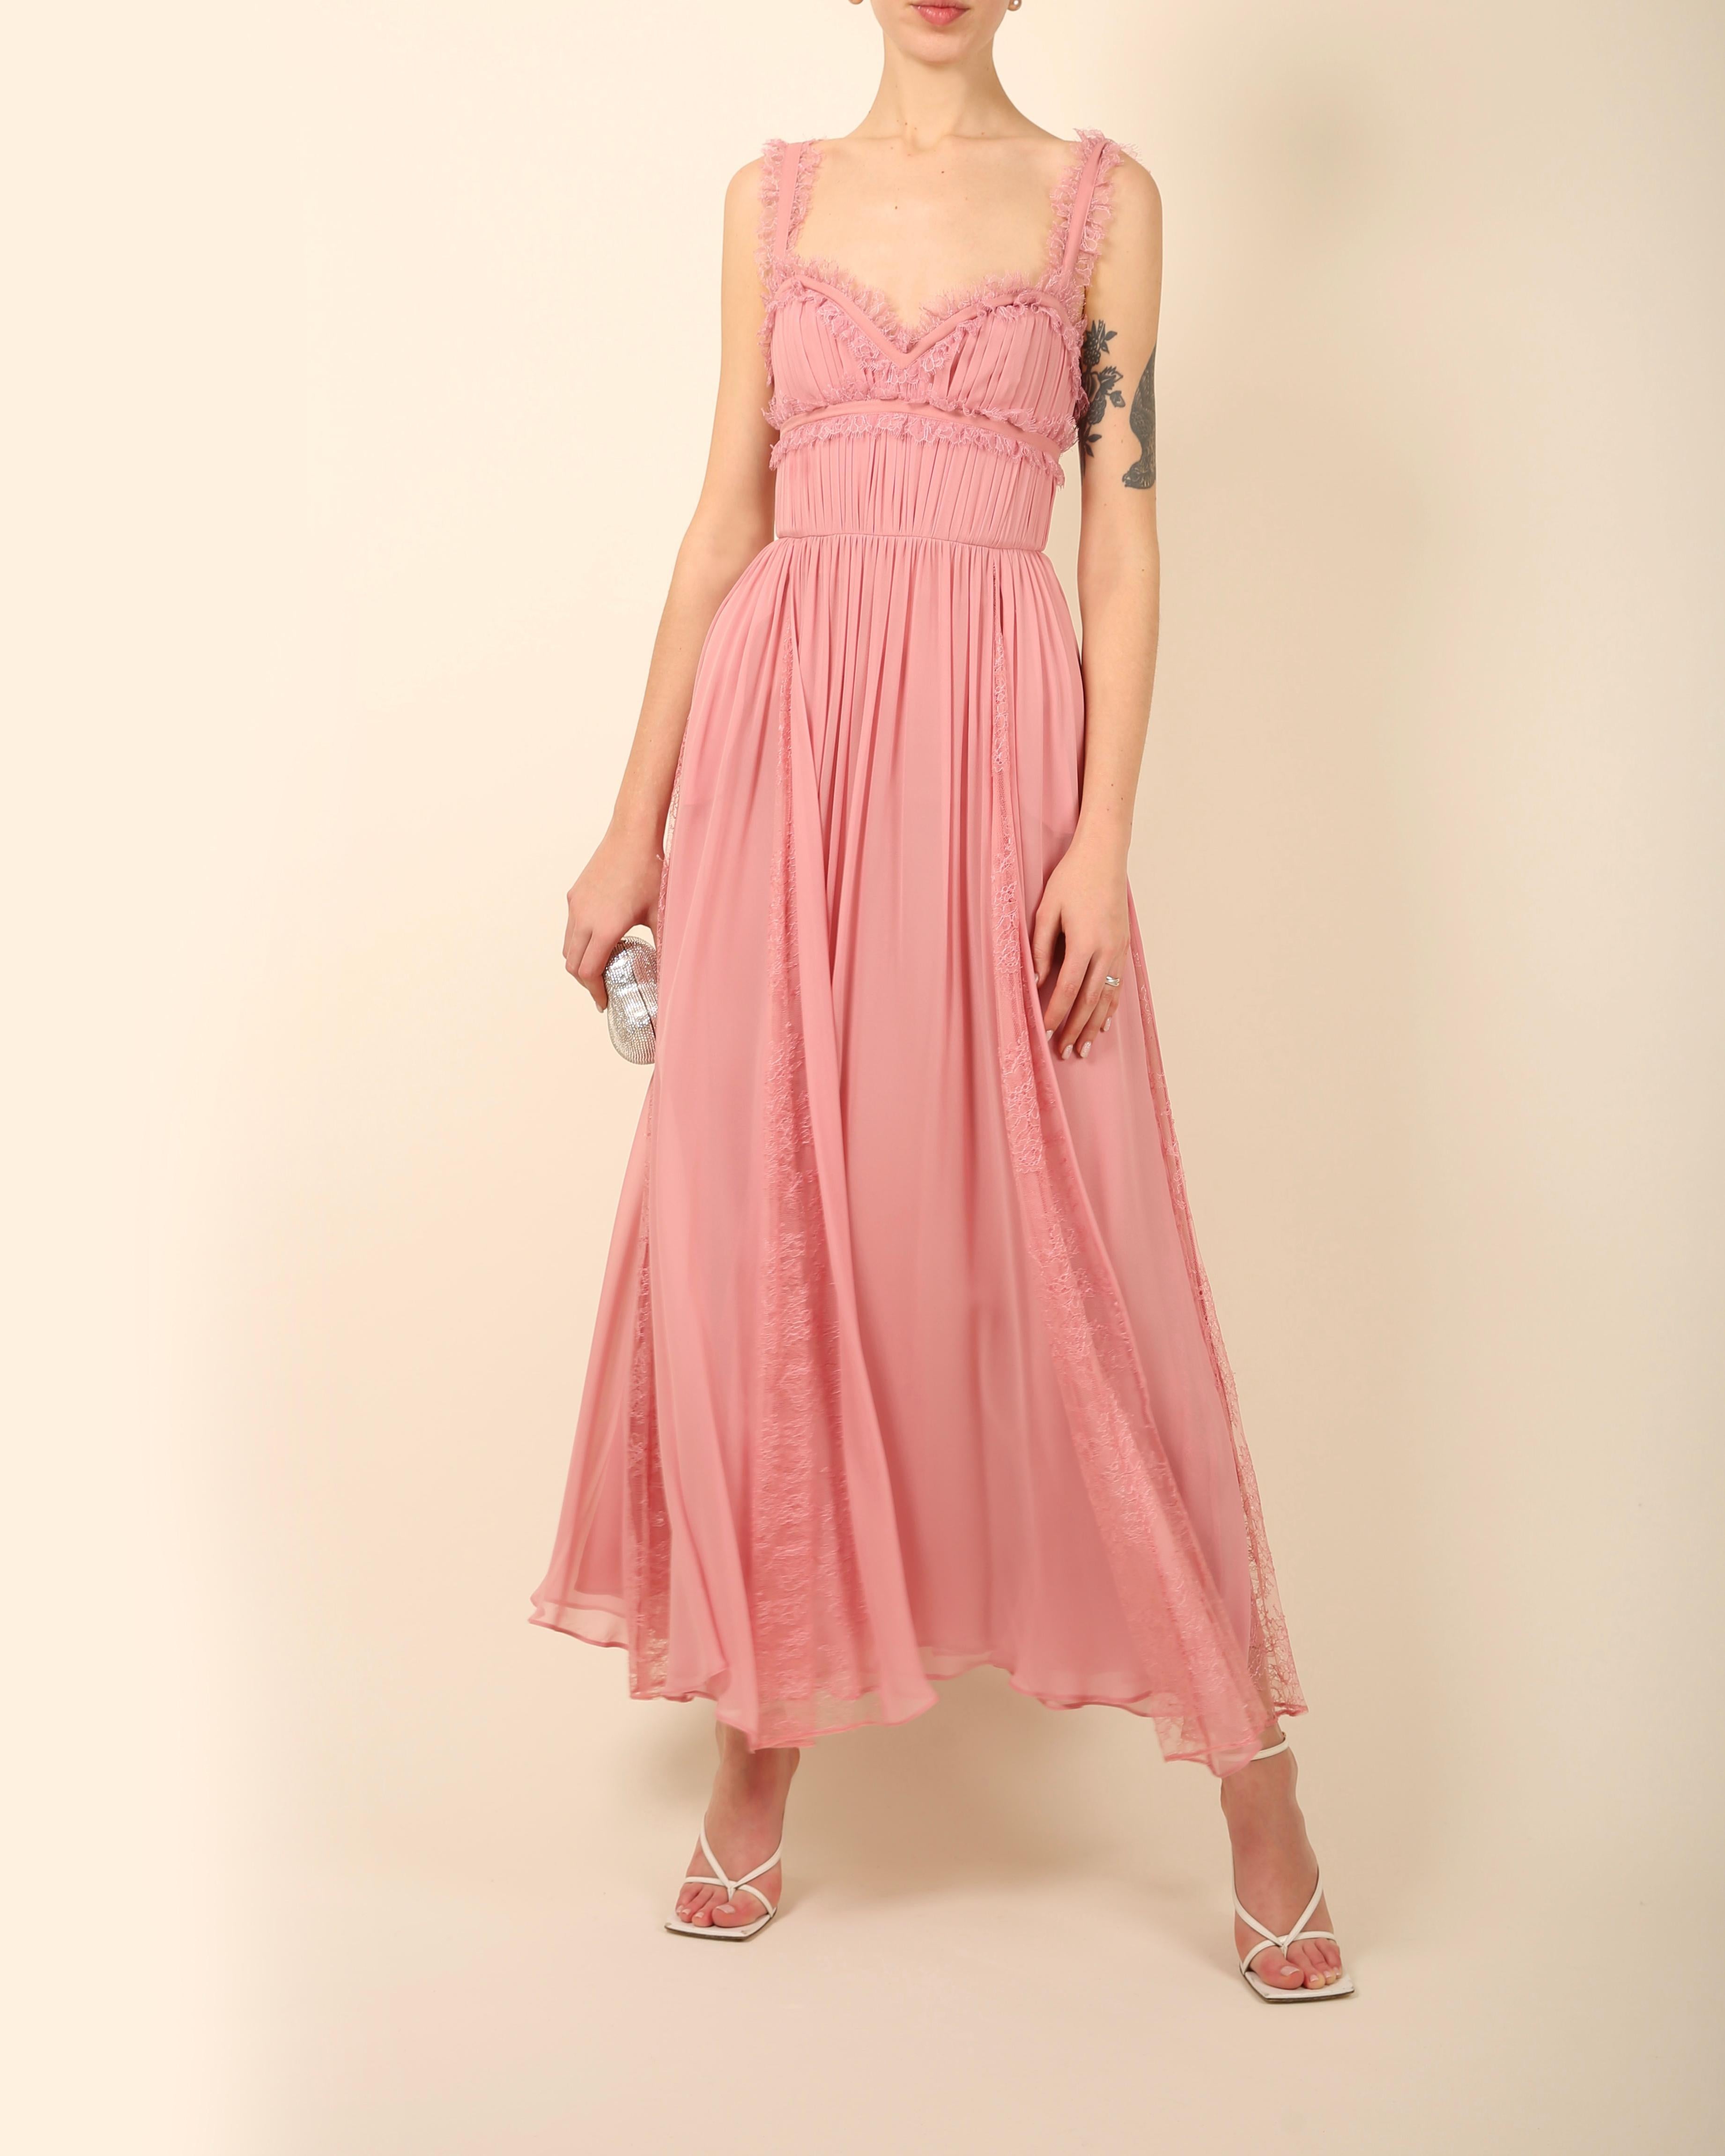 Elie Saab pink lace trimmed cut out corset bustier maxi dress gown 34 For Sale 1